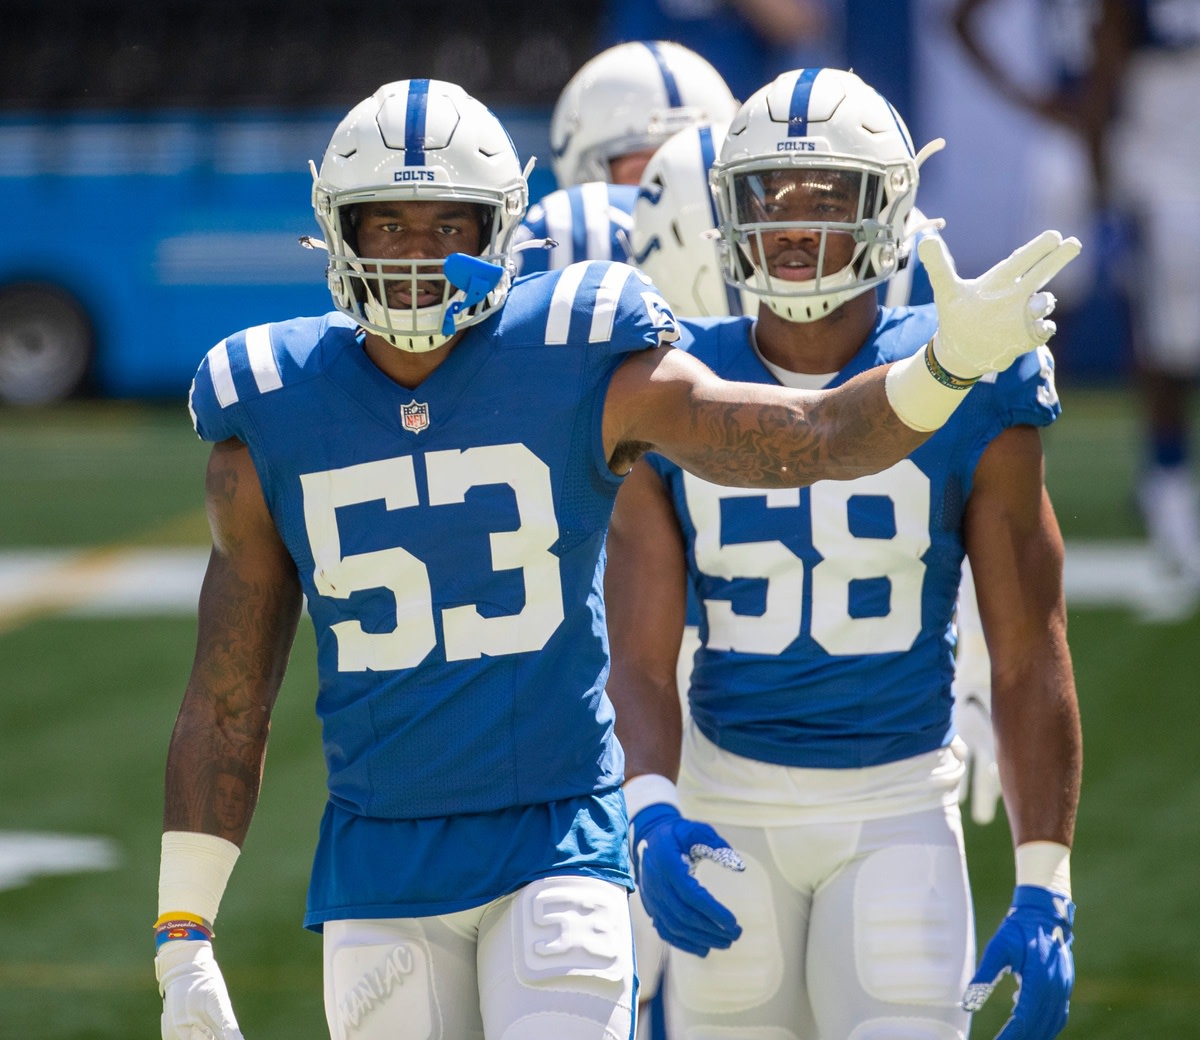 All-Pro Darius Leonard (53) leads a talented group of Indianapolis Colts linebackers.